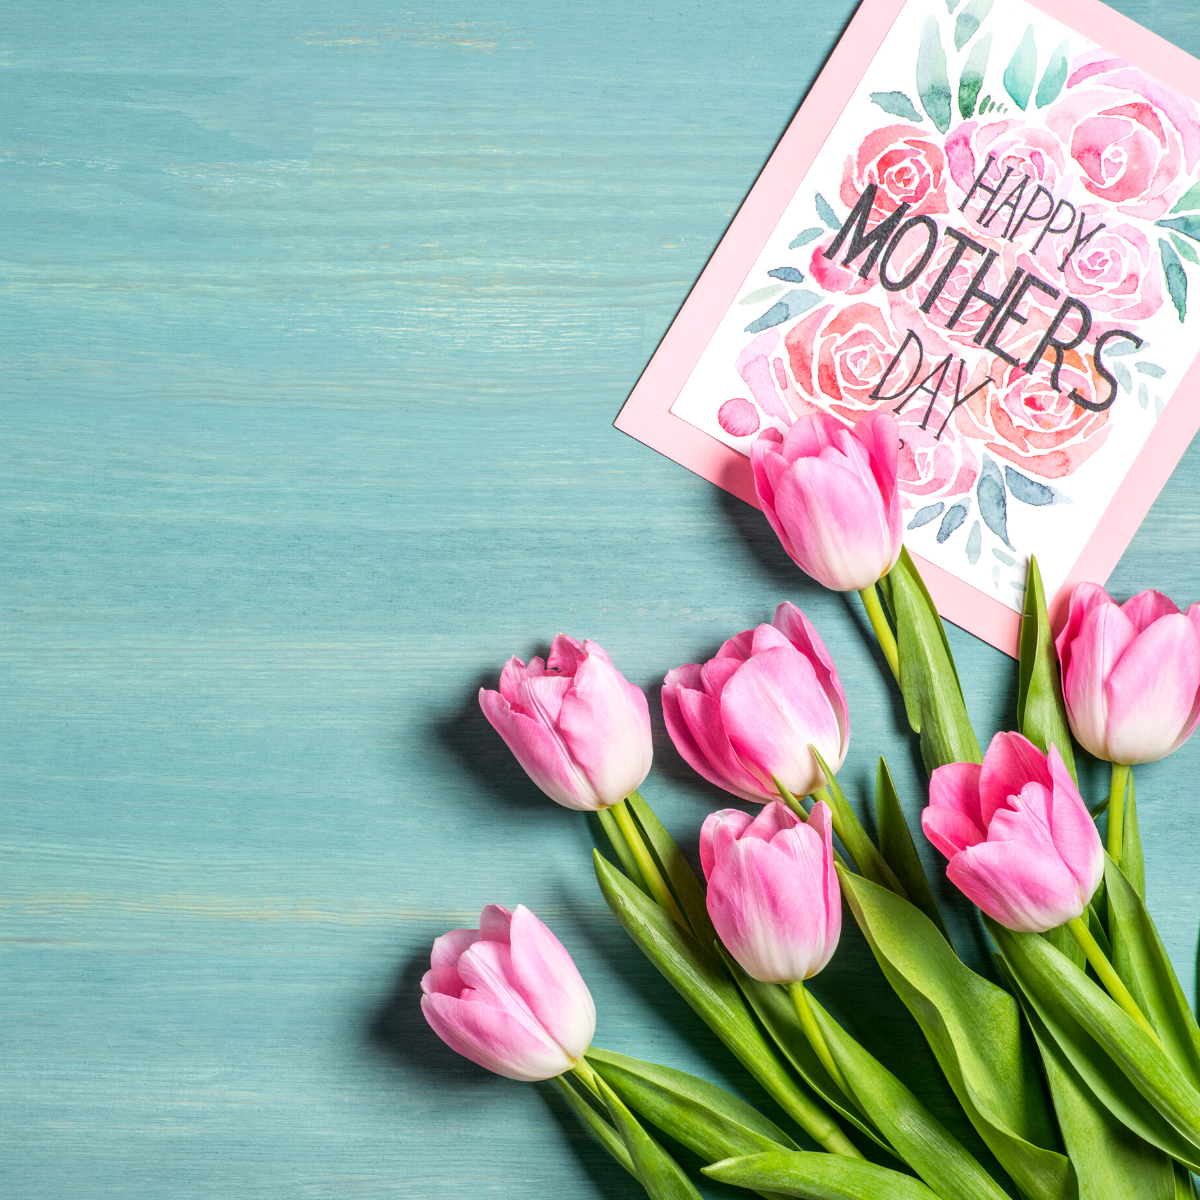 How are you celebrating Mother’s Day?